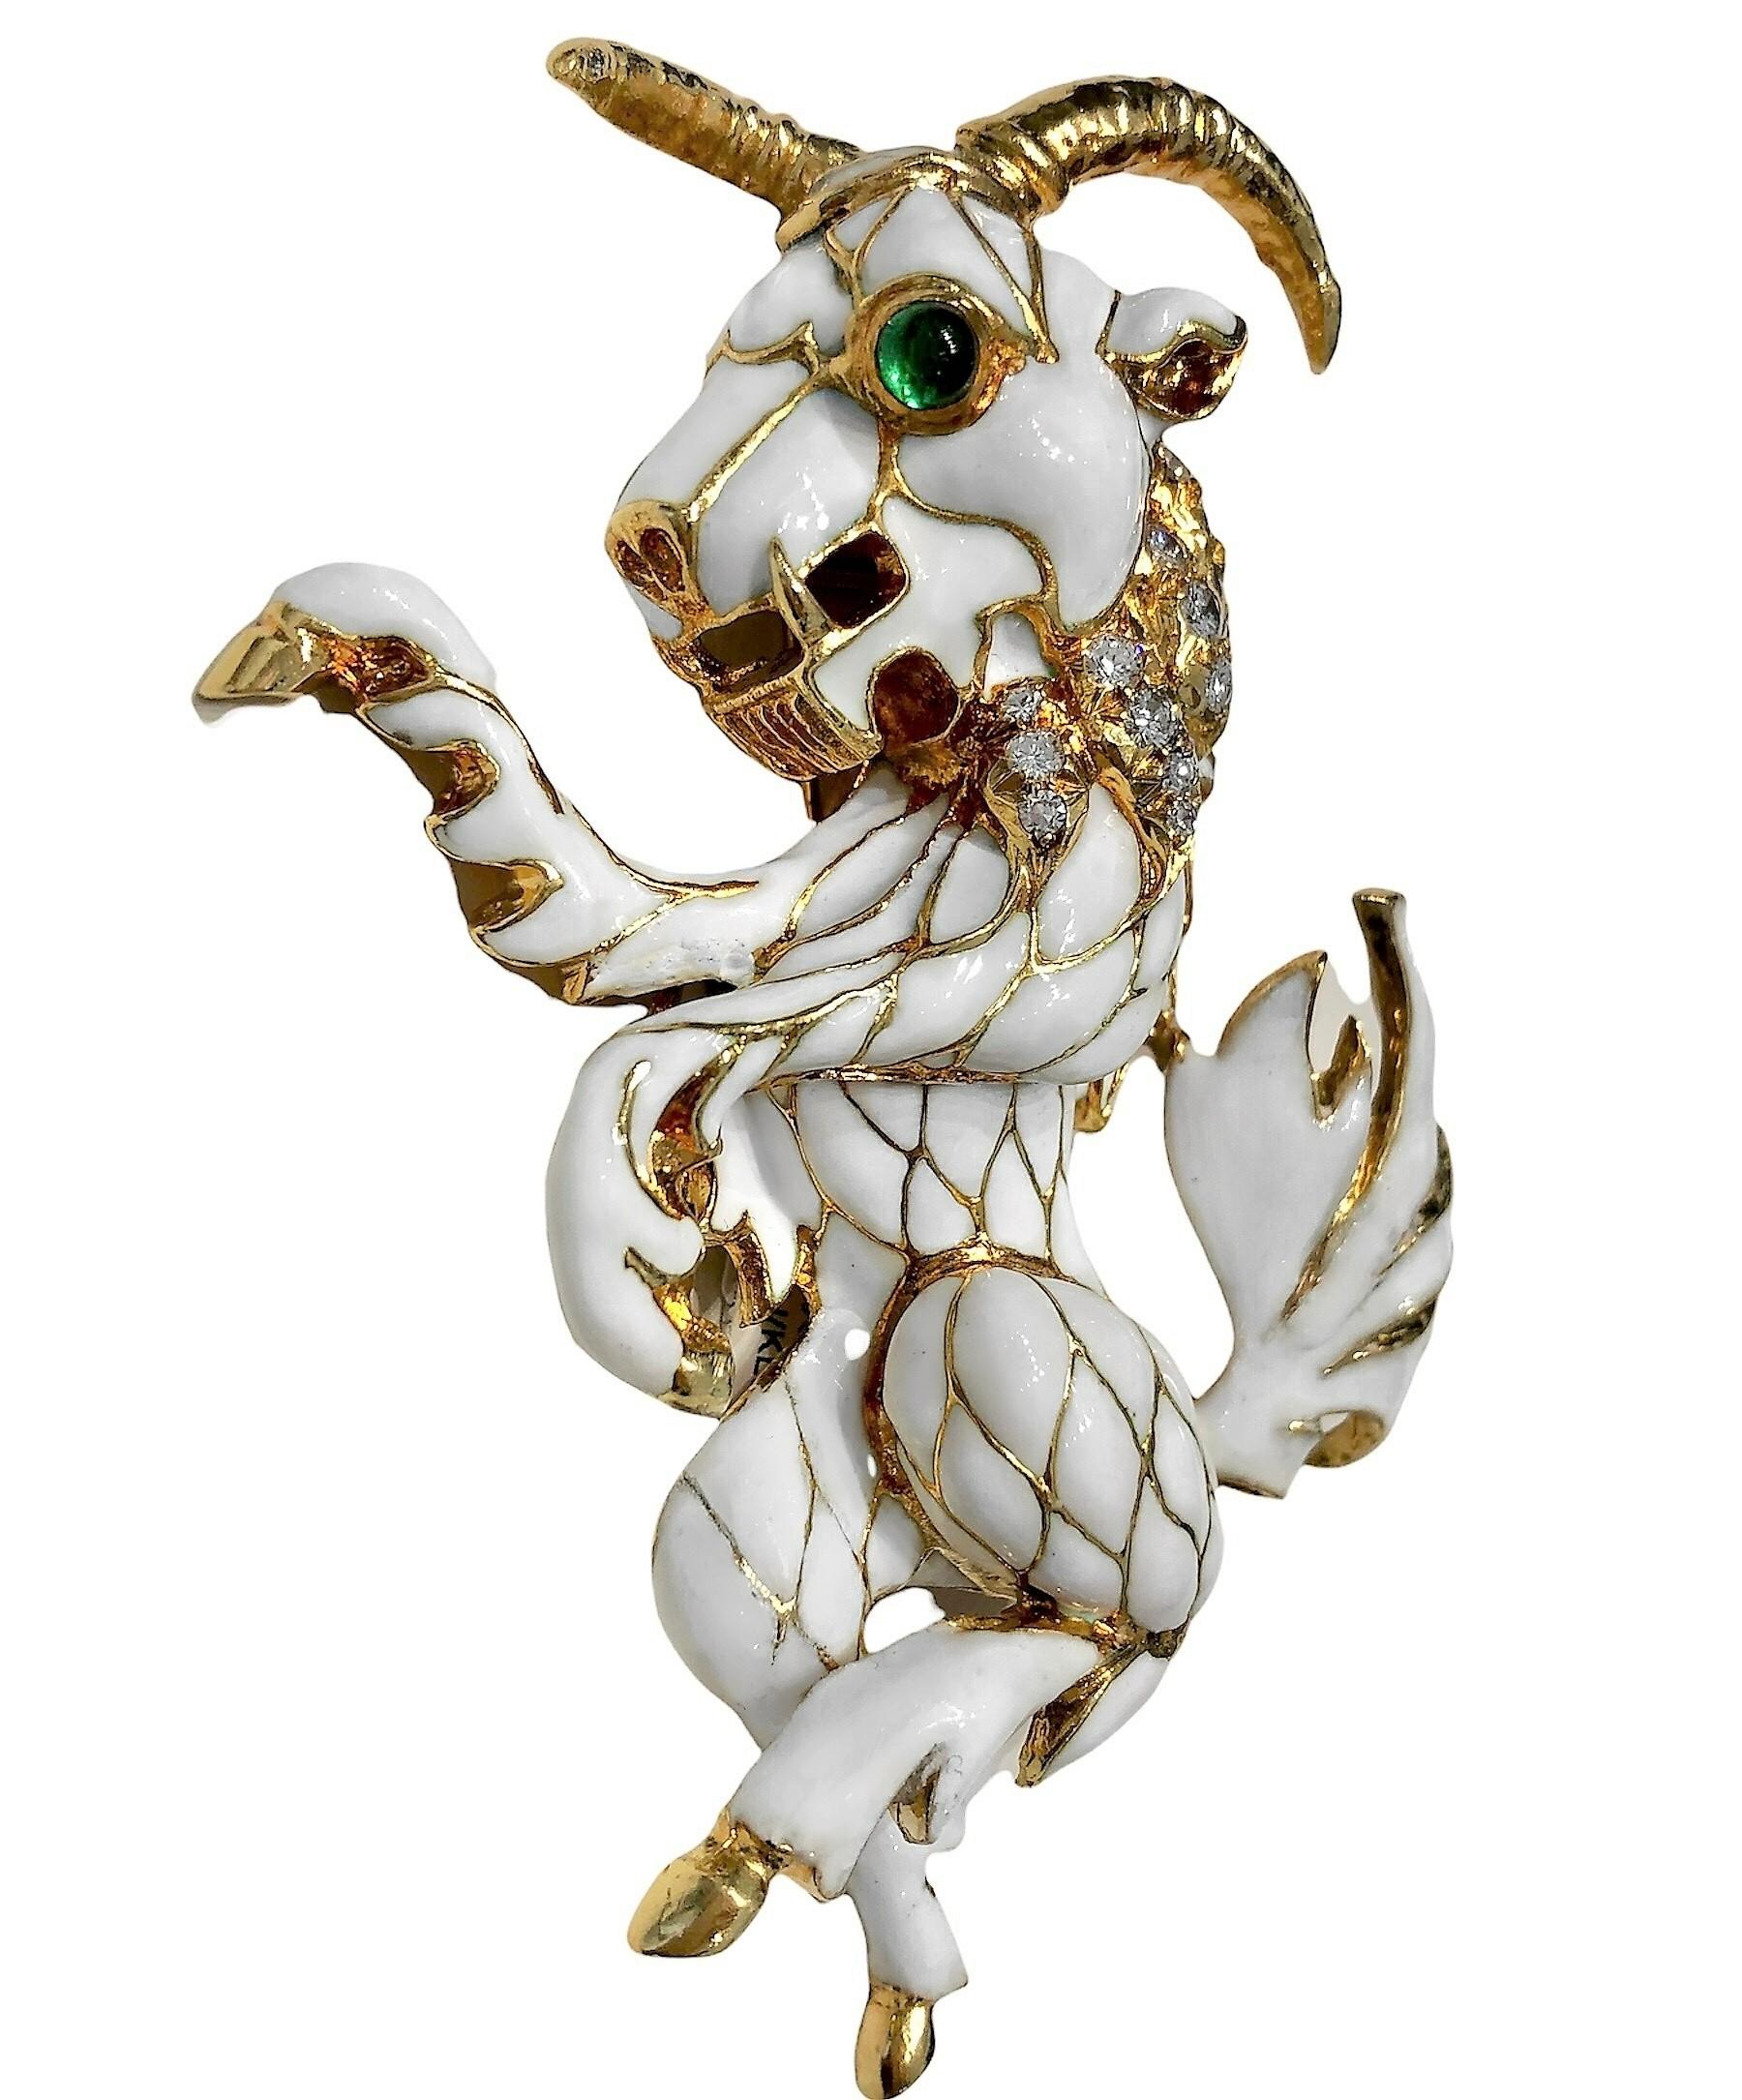 This highly articulated and very large Pan characterization brooch is finely crafted and covered over most of its surface with luxurious white cloisonne enamel. Bezel set are two emerald cabochon eyes, and seventeen brilliant cut diamonds grace the